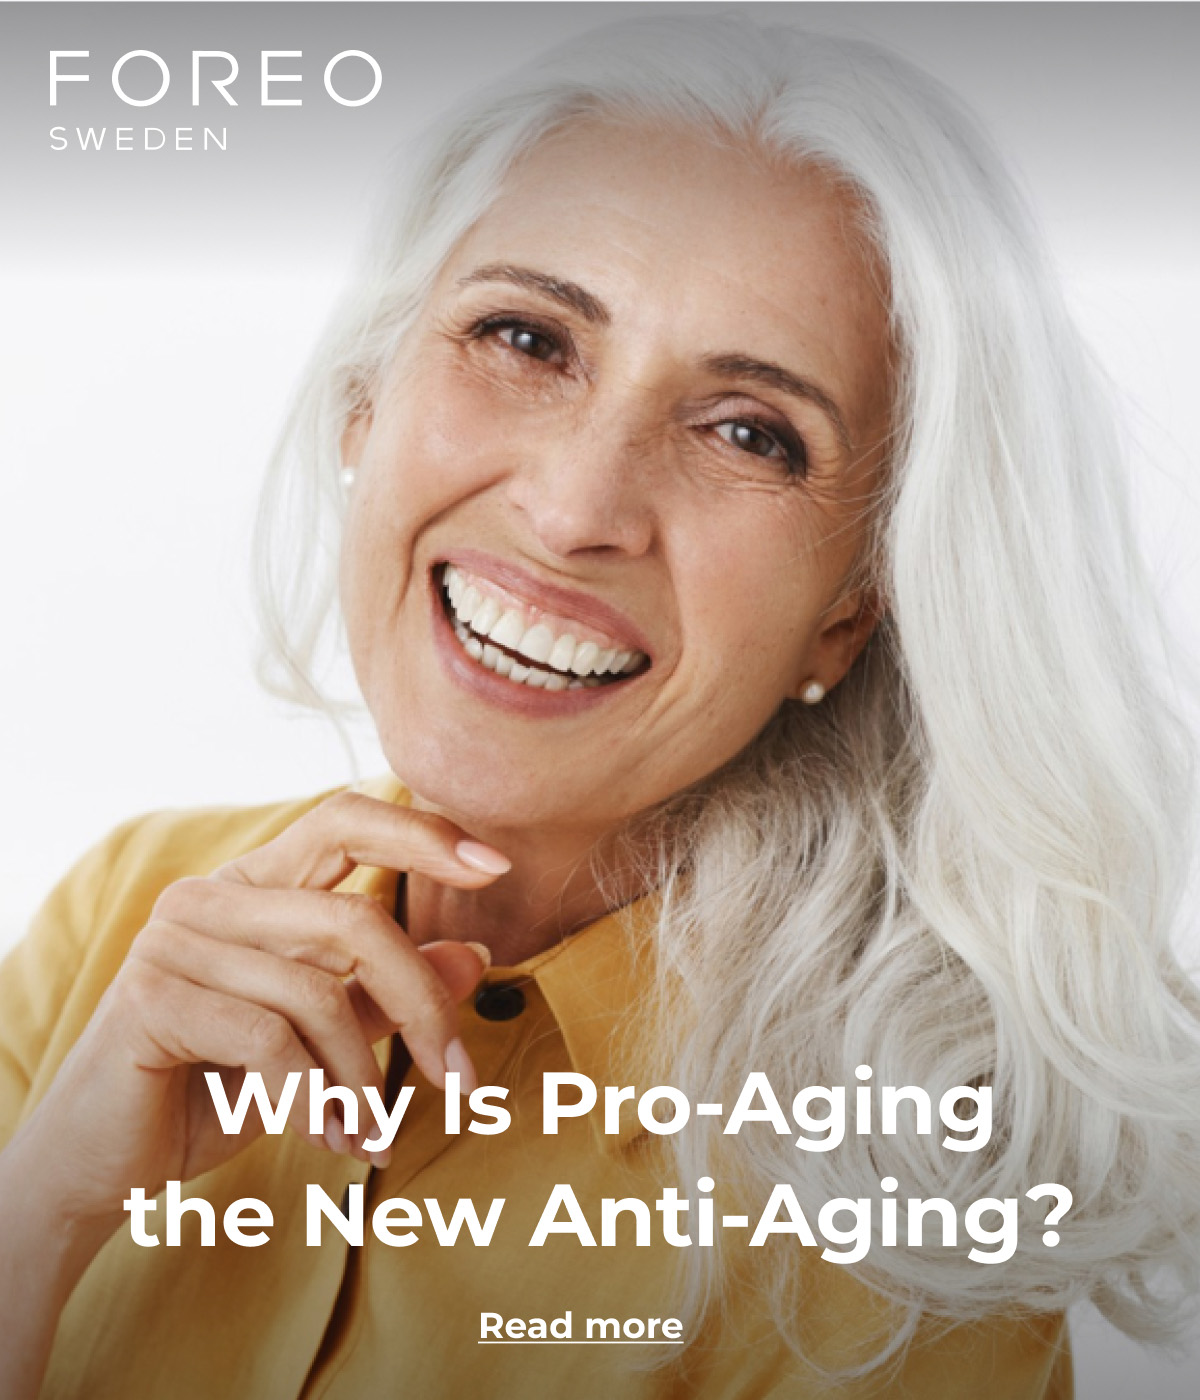 Why Is the Pro-Aging the New Anti-Aging? - MYSA